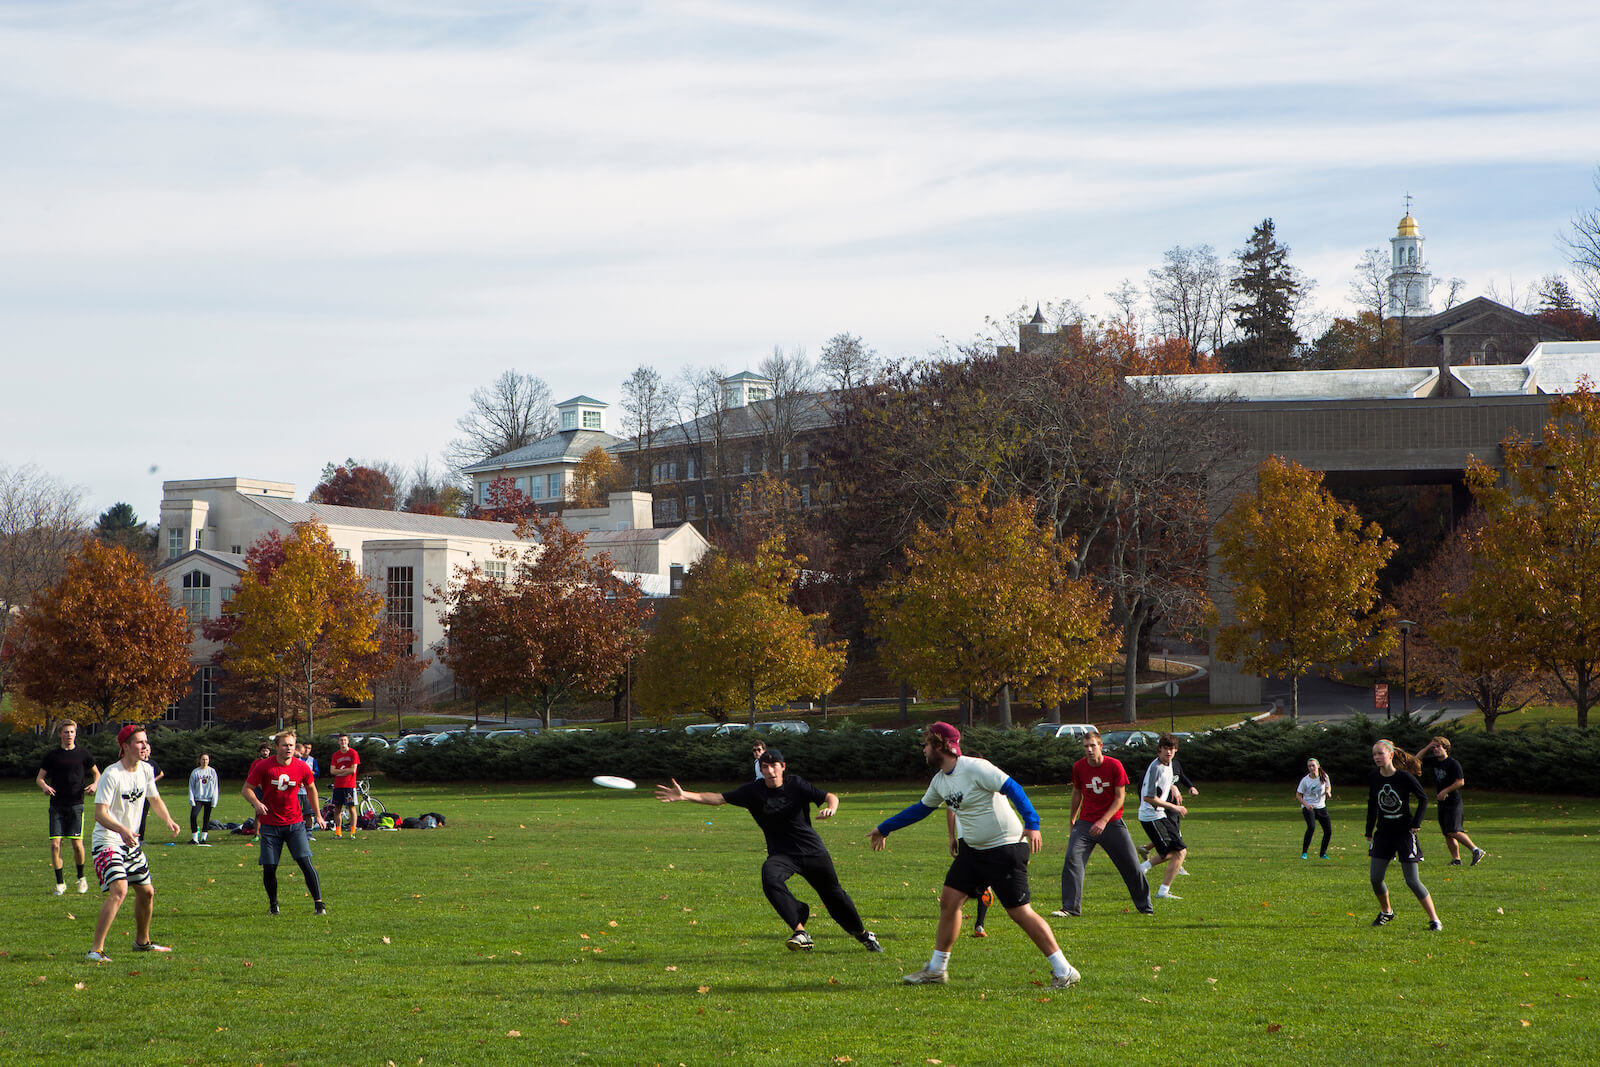 Members of the Ultimate Frisbee club play a game of pickup on Whitnall Field.